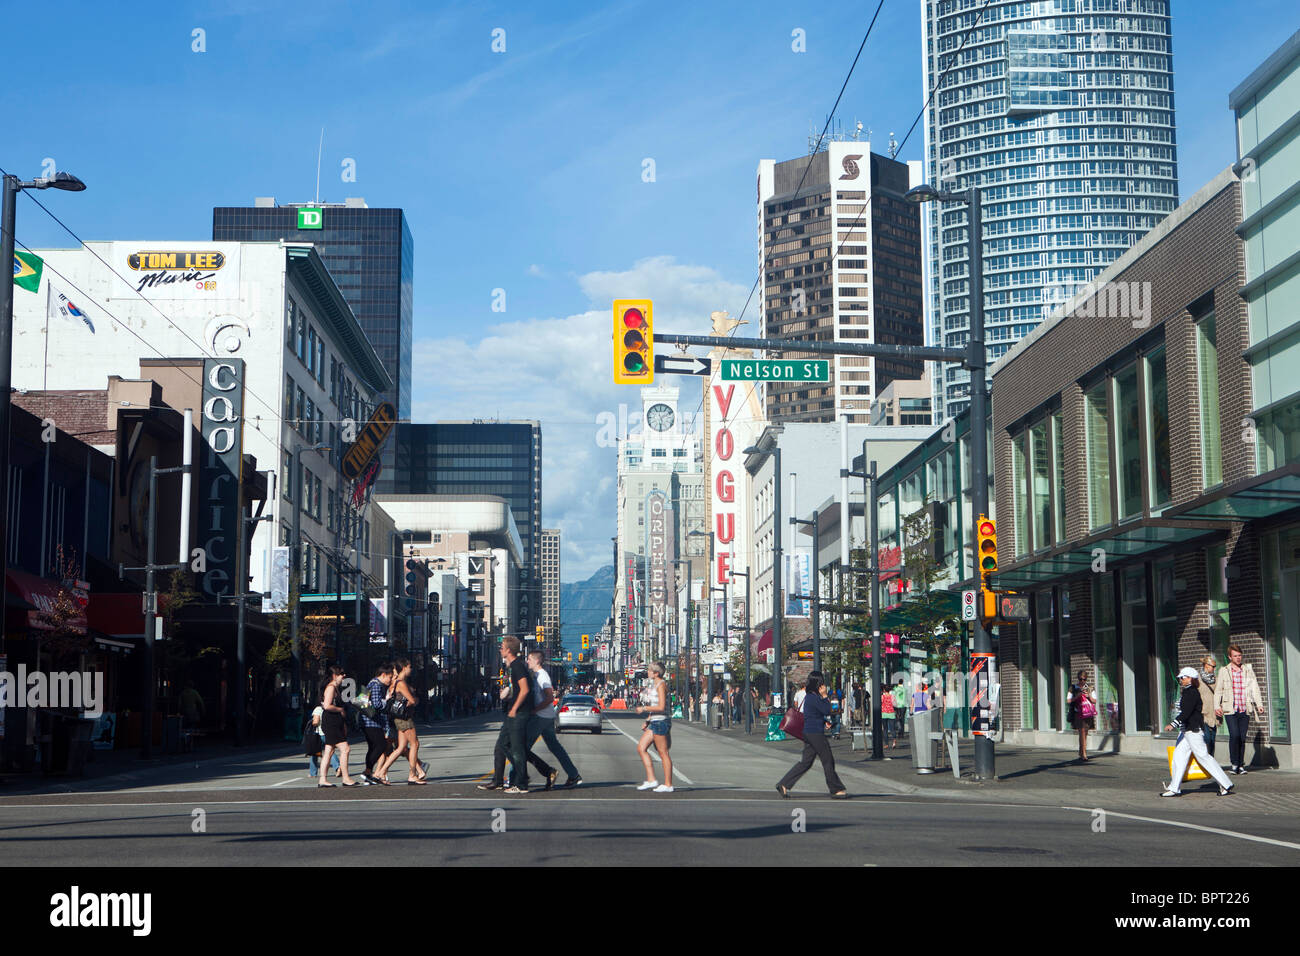 Pedestrians cross the intersection of Nelson Street and Granville Street, Vancouver, British Columbia, Canada Stock Photo